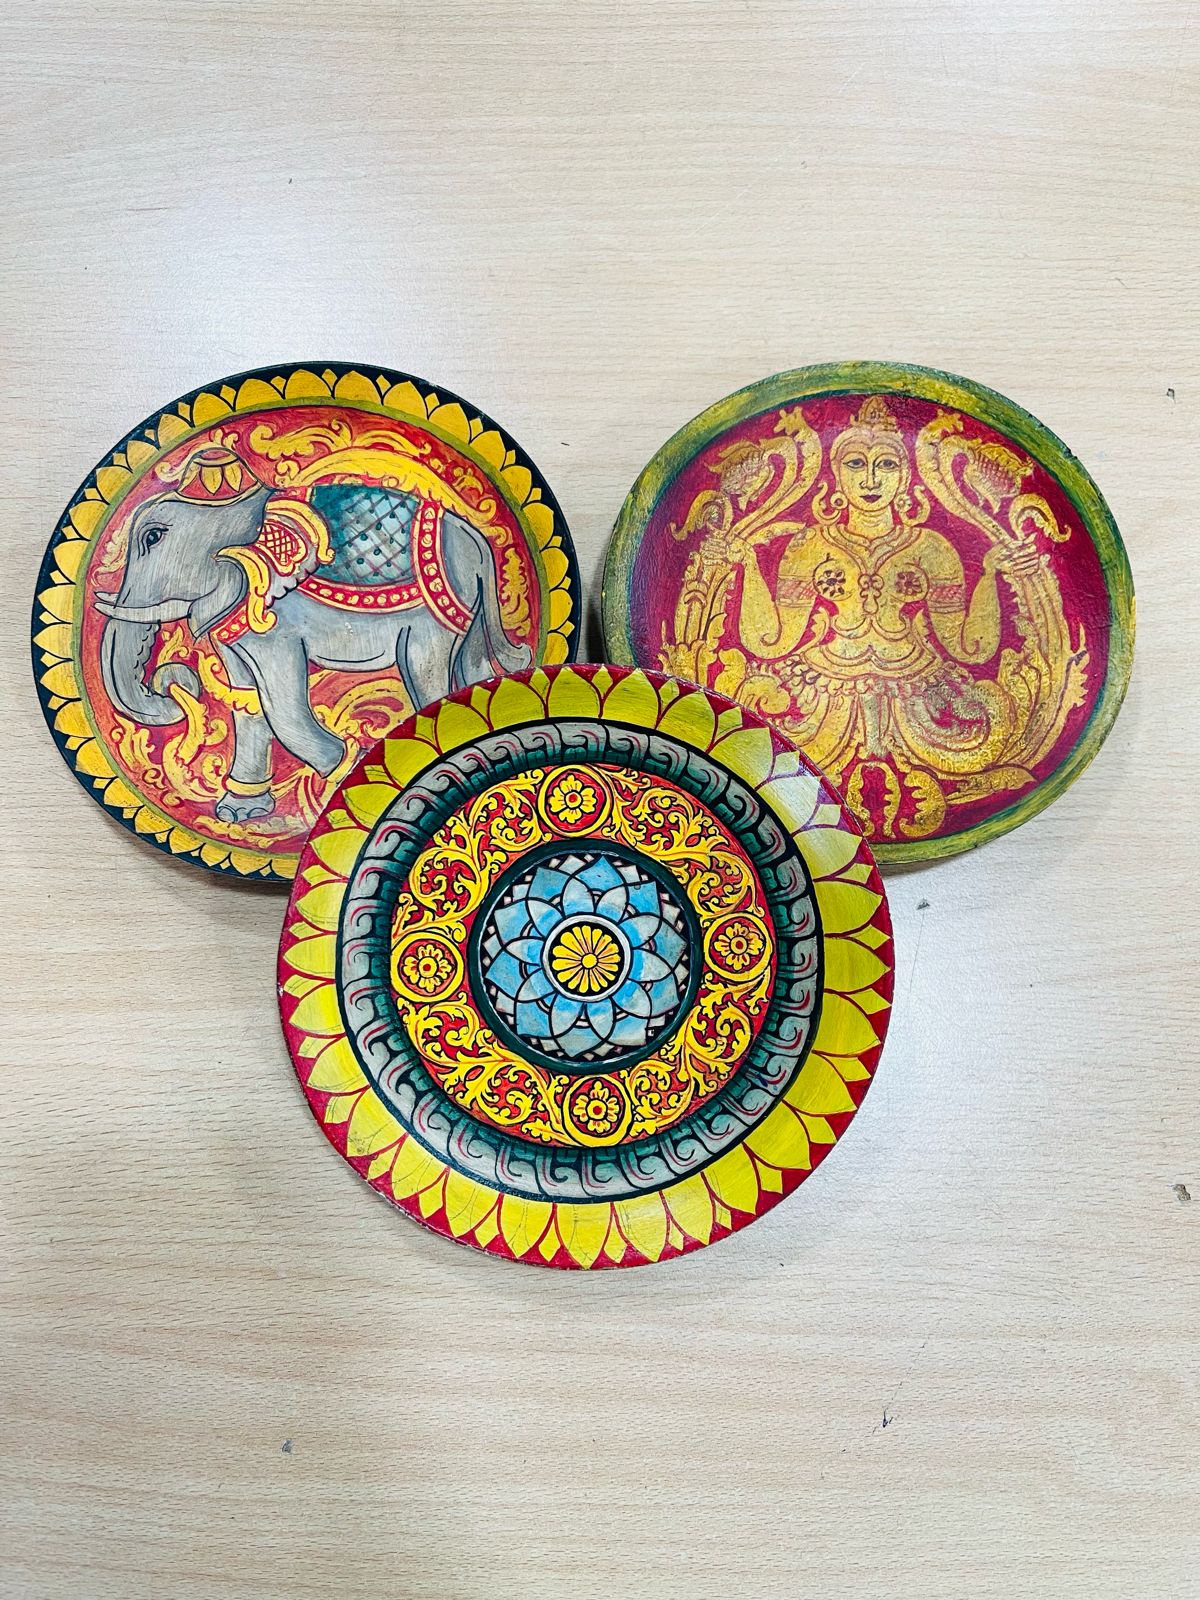 Wooden Plate with Traditional Artwork Designs